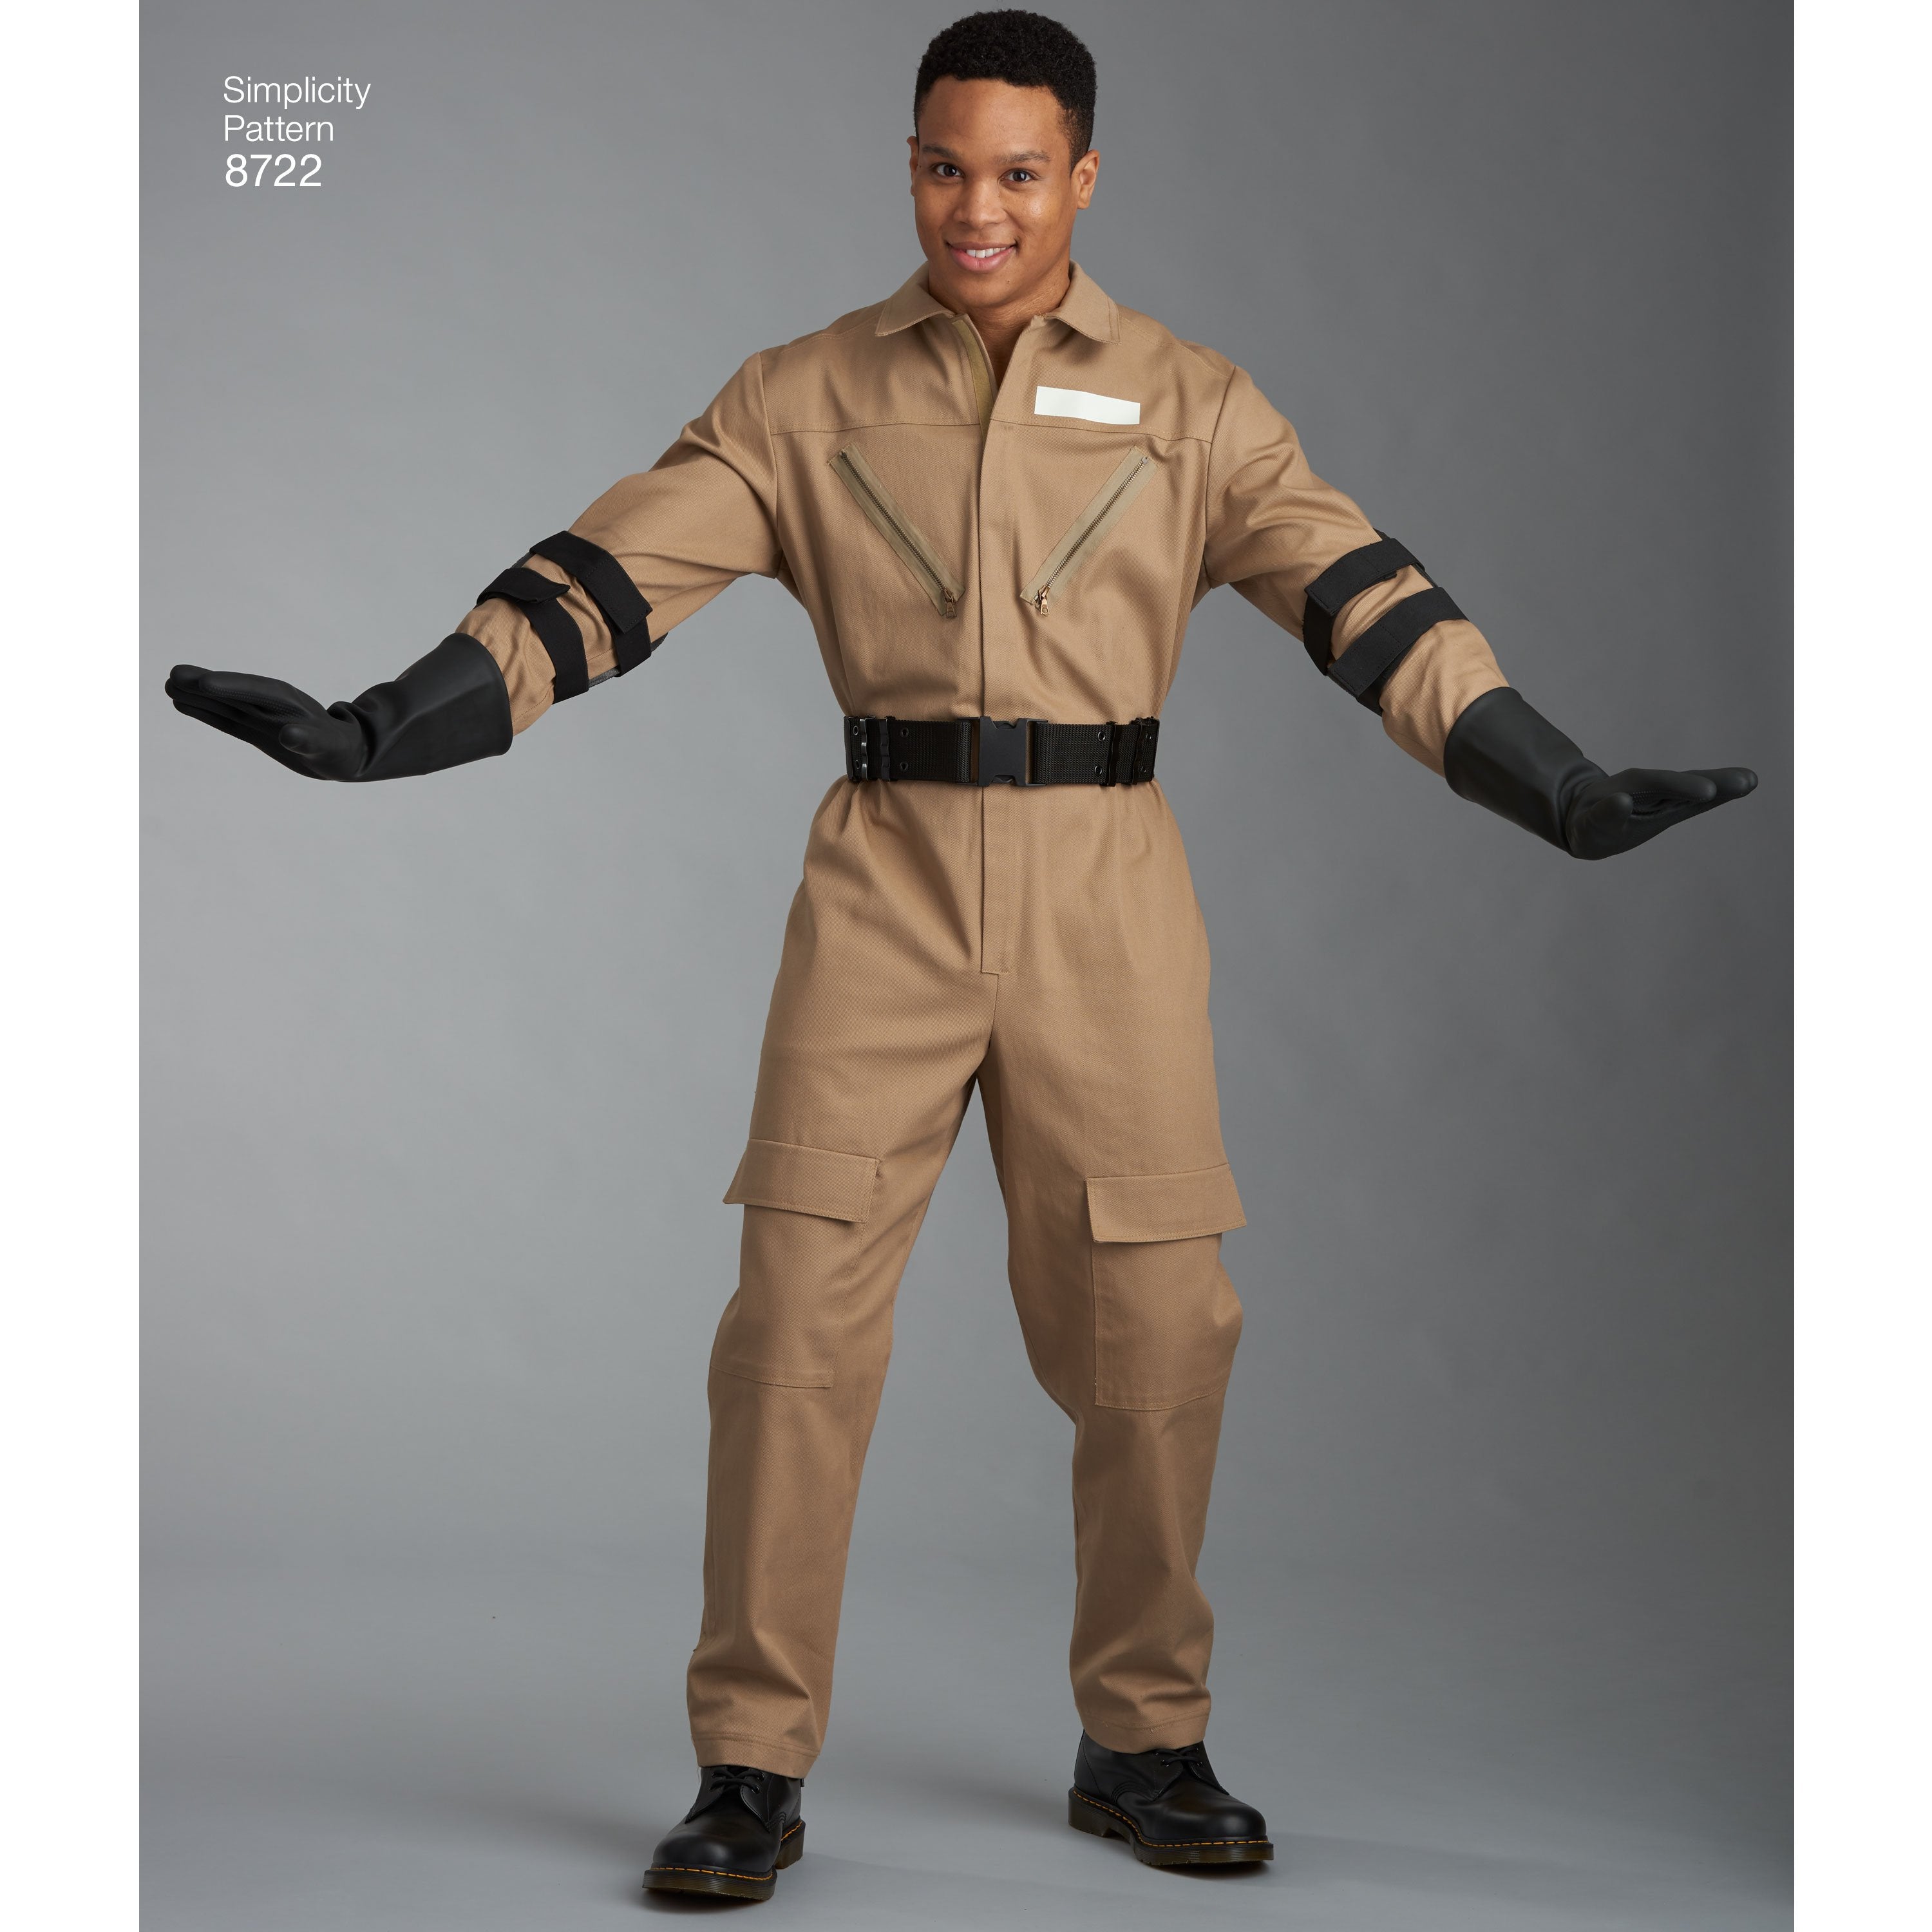 Simplicity Pattern 8722 Women's, Men's and Teens' Costume from Jaycotts Sewing Supplies